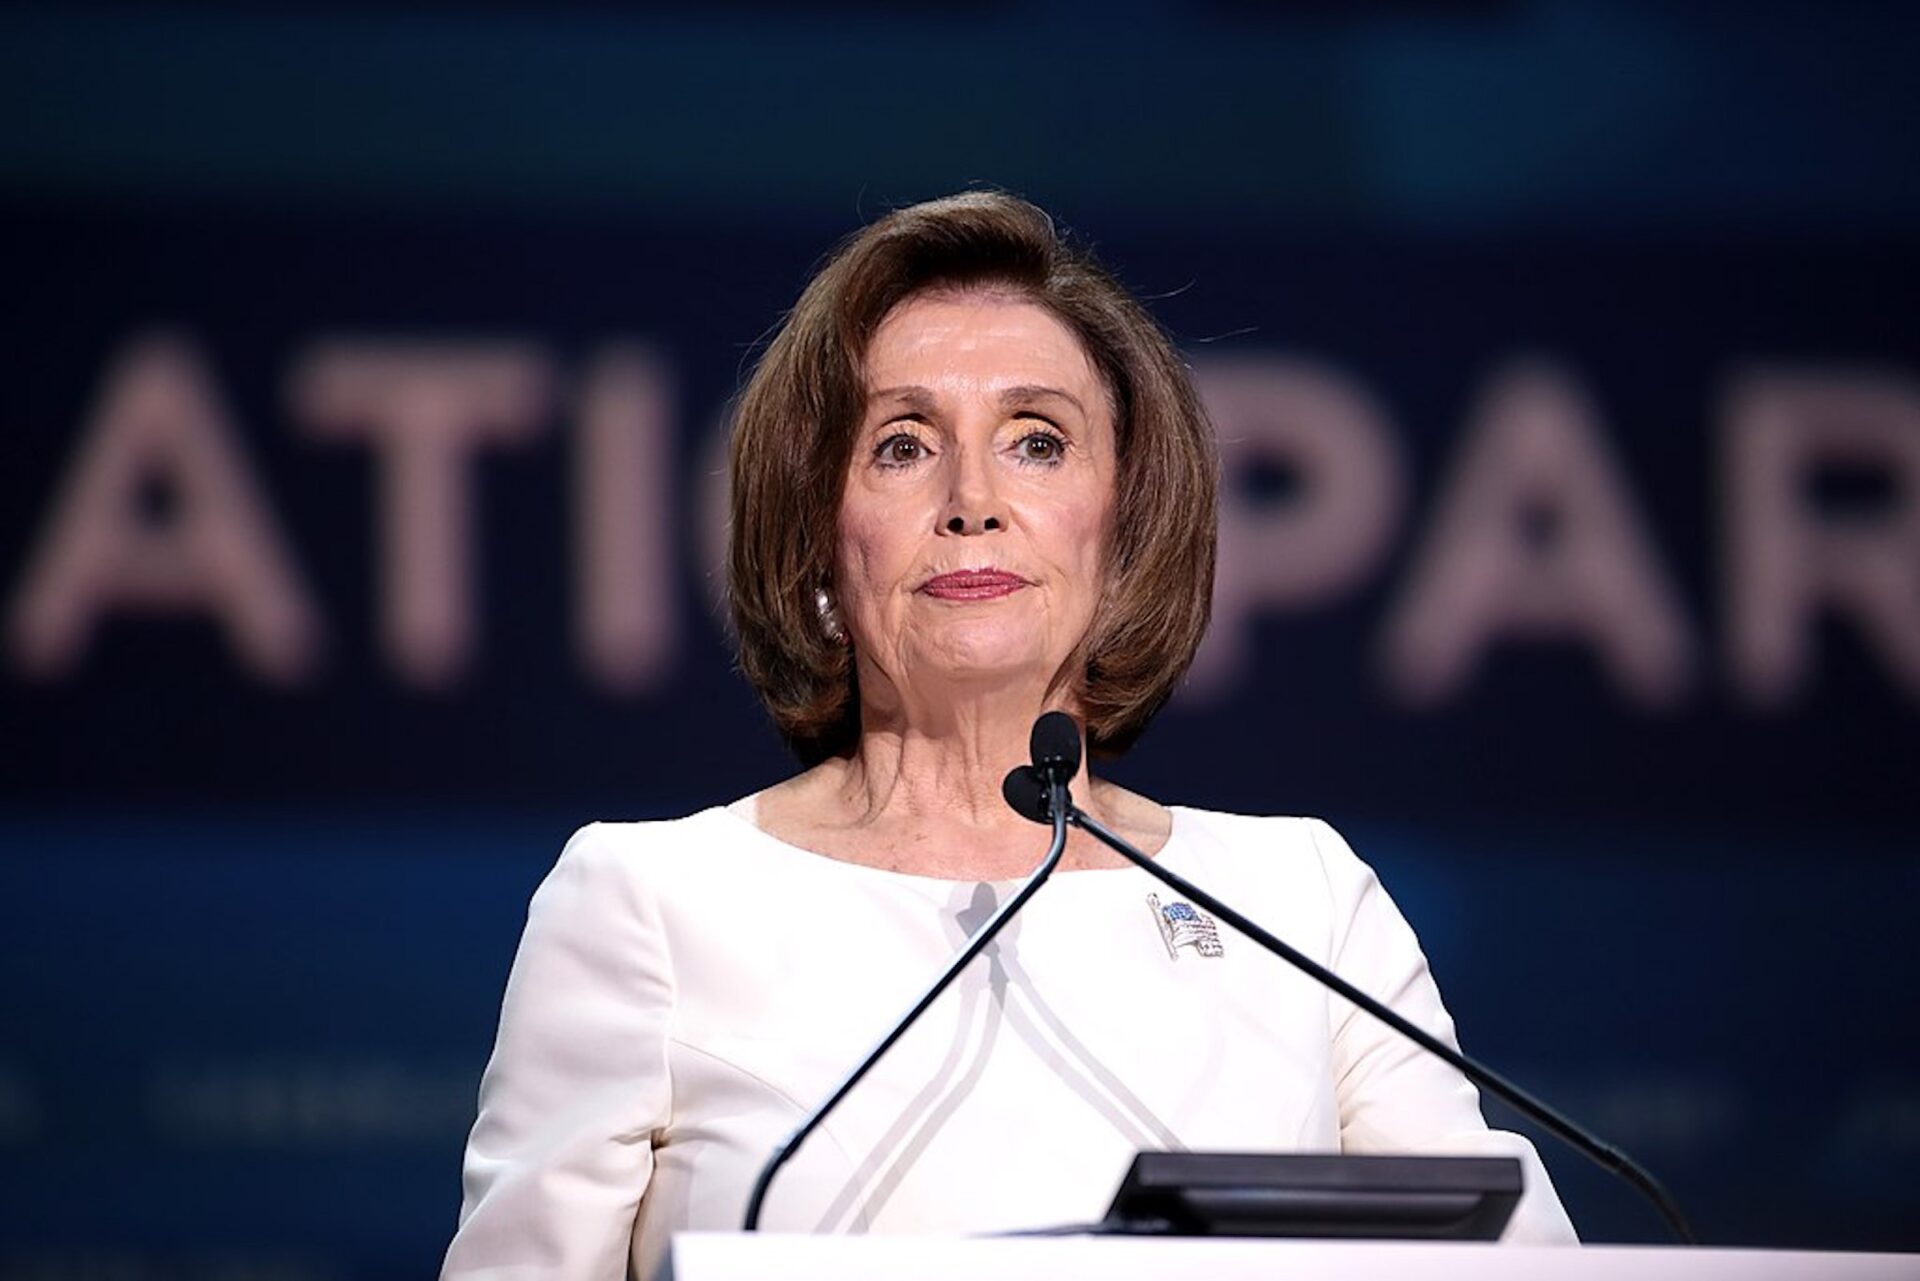 Pelosi, her father, Taiwan and the Holocaust